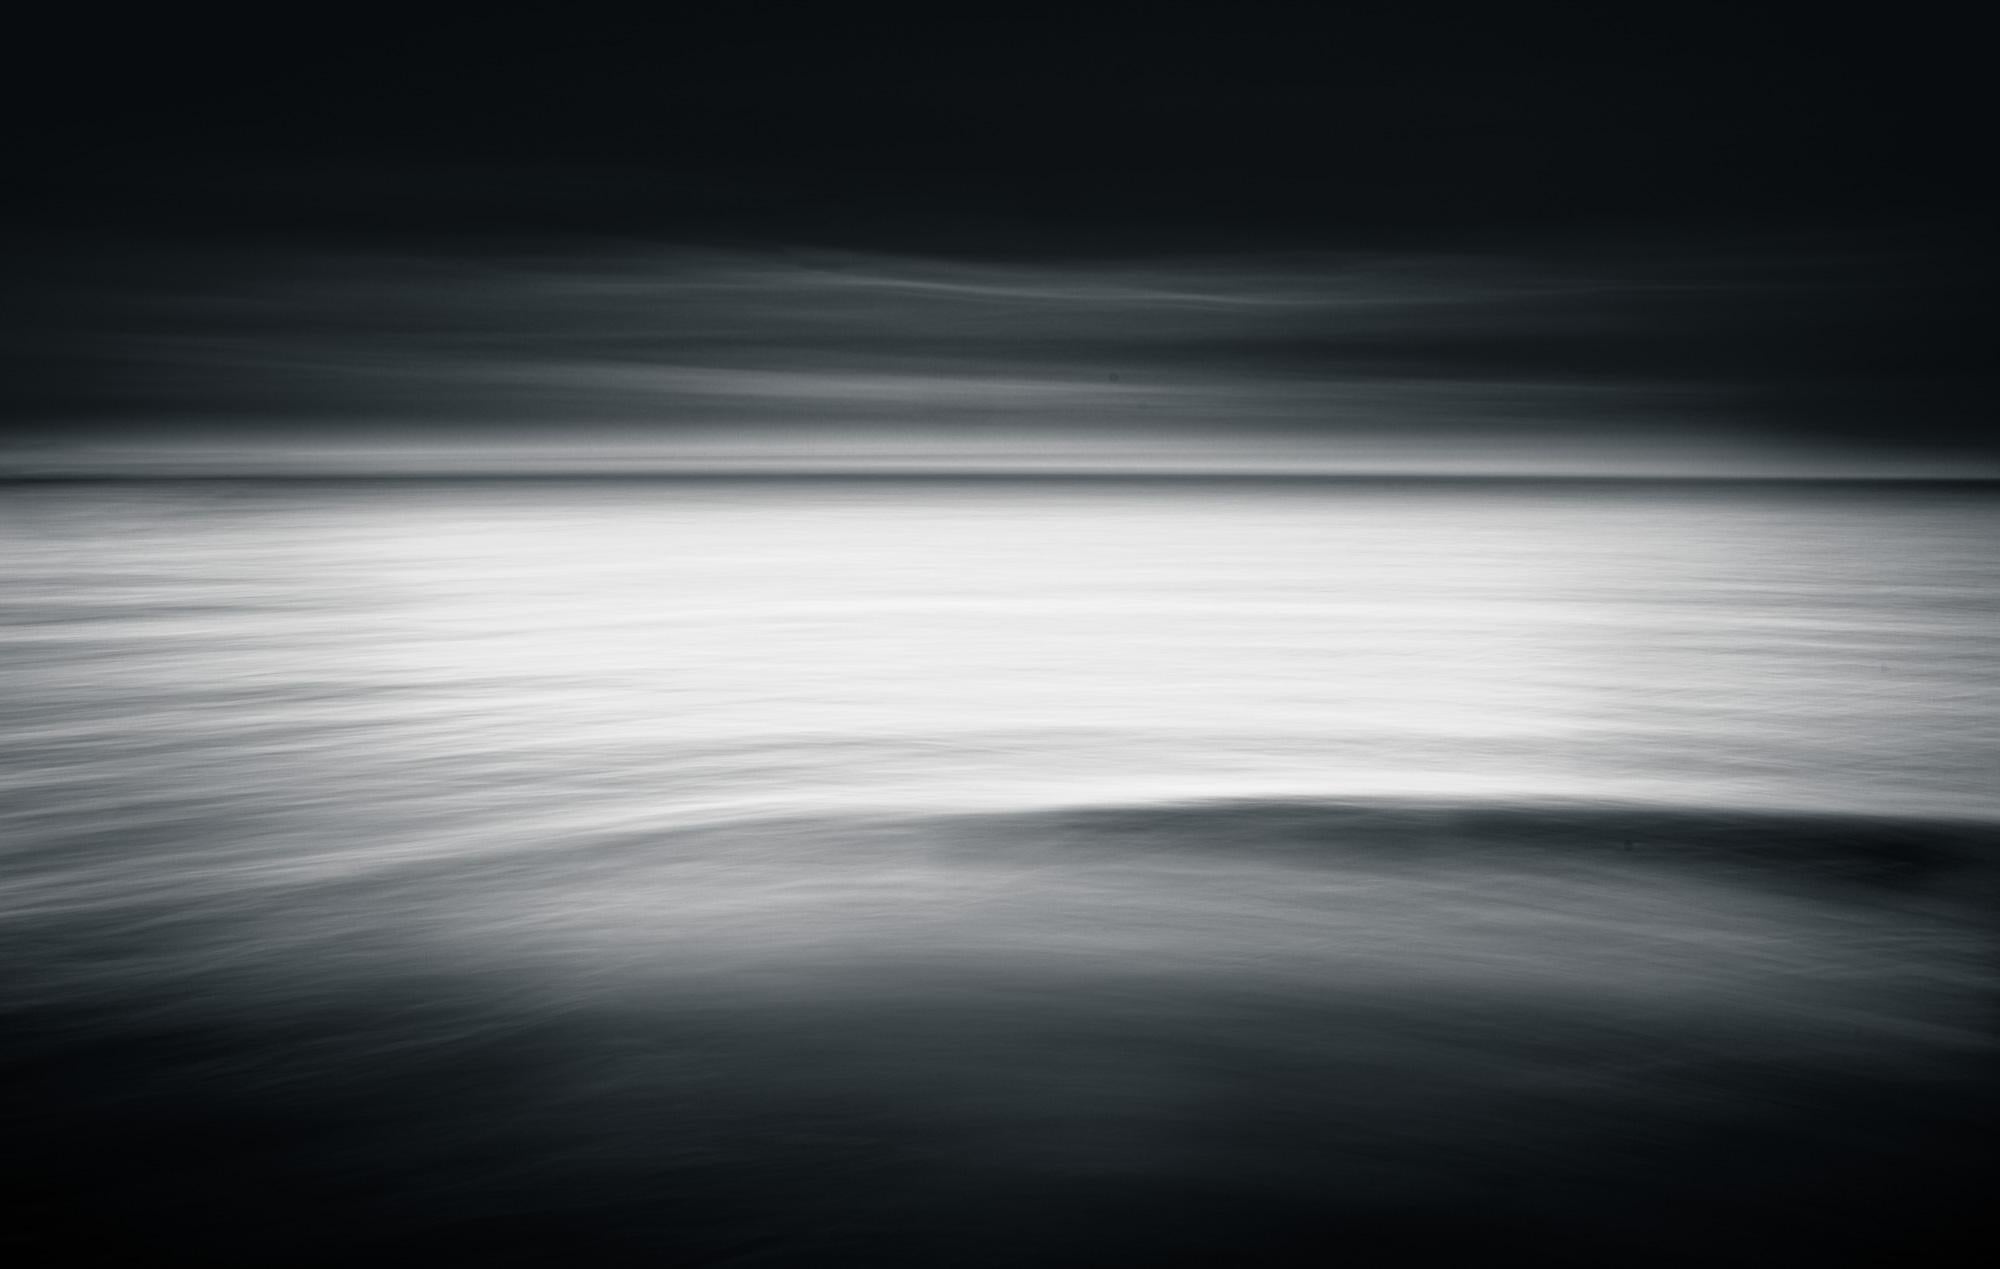 Limited Edition Black and White Photograph Waves, Ocean Seascape #98

This is #98 from the Kinetic Solitude series. It has been shown in the Dow Museum of Fine Arts as part of a exhibition that explored variations on the theme of water.

My